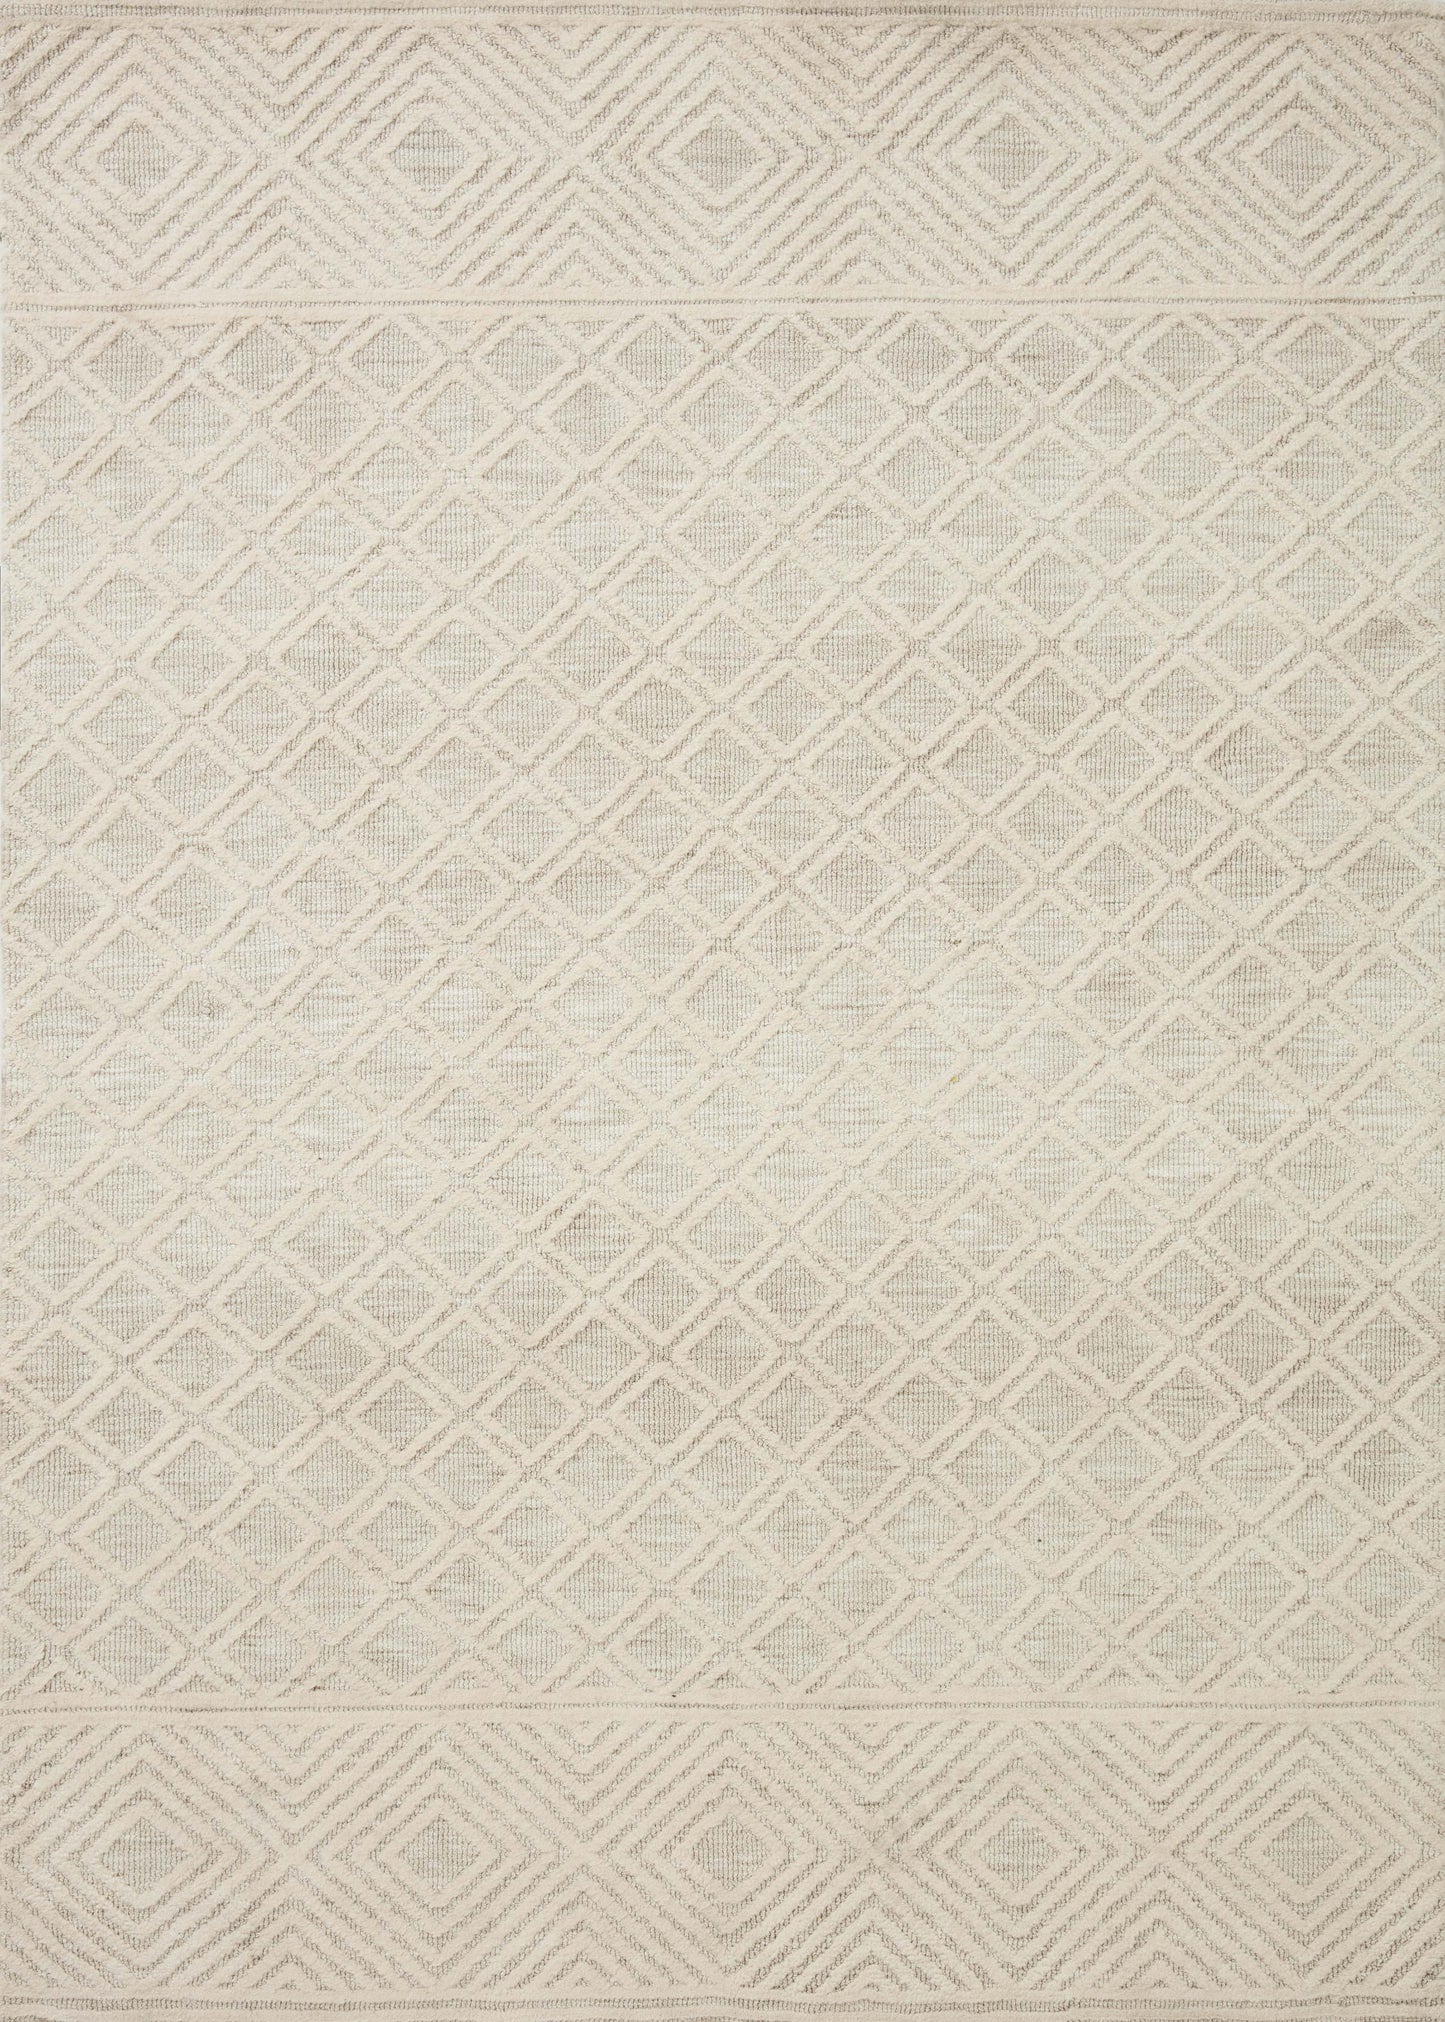 A picture of Loloi's Neda rug, in style NED-04, color Ivory / Natural